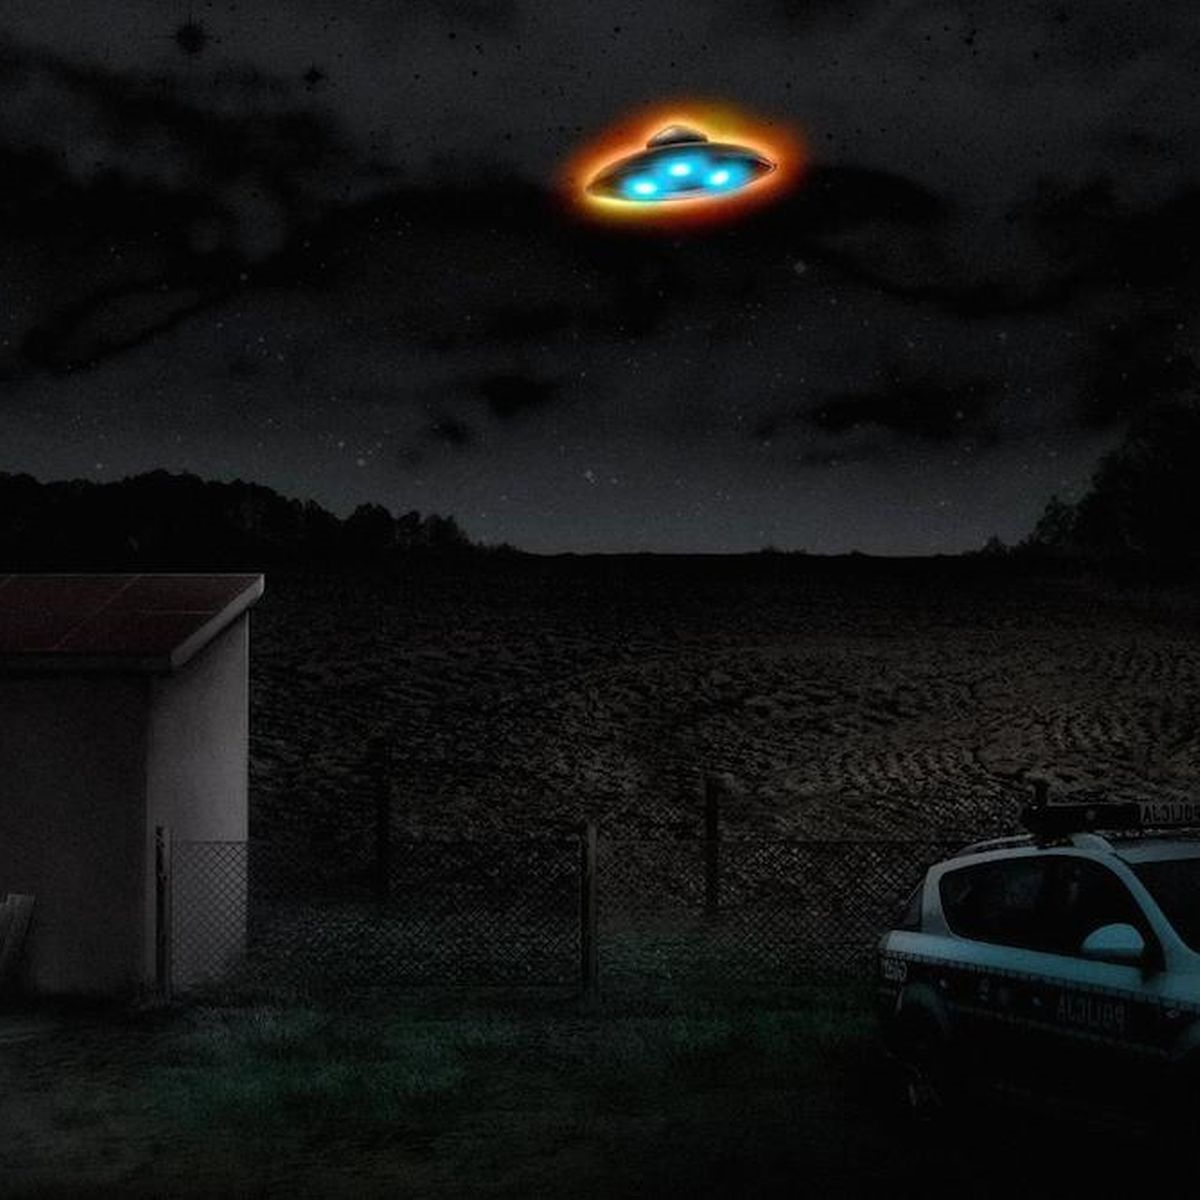 A depiction of a UFO over a field